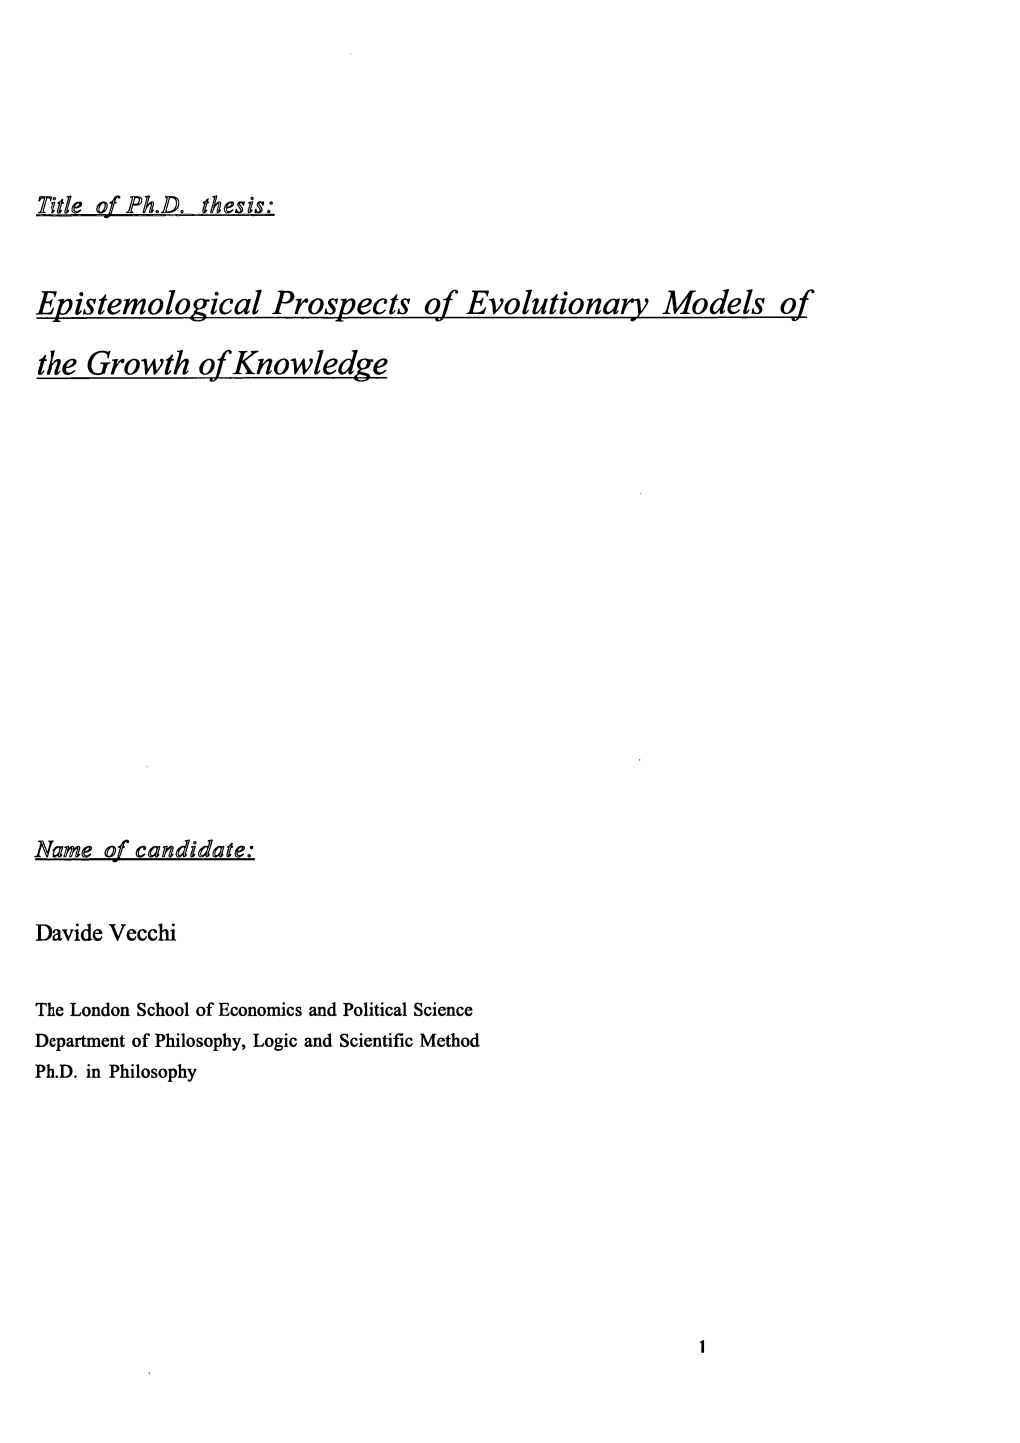 Epistemological Prospects of Evolutionary Models O F the Growth of Knowledge